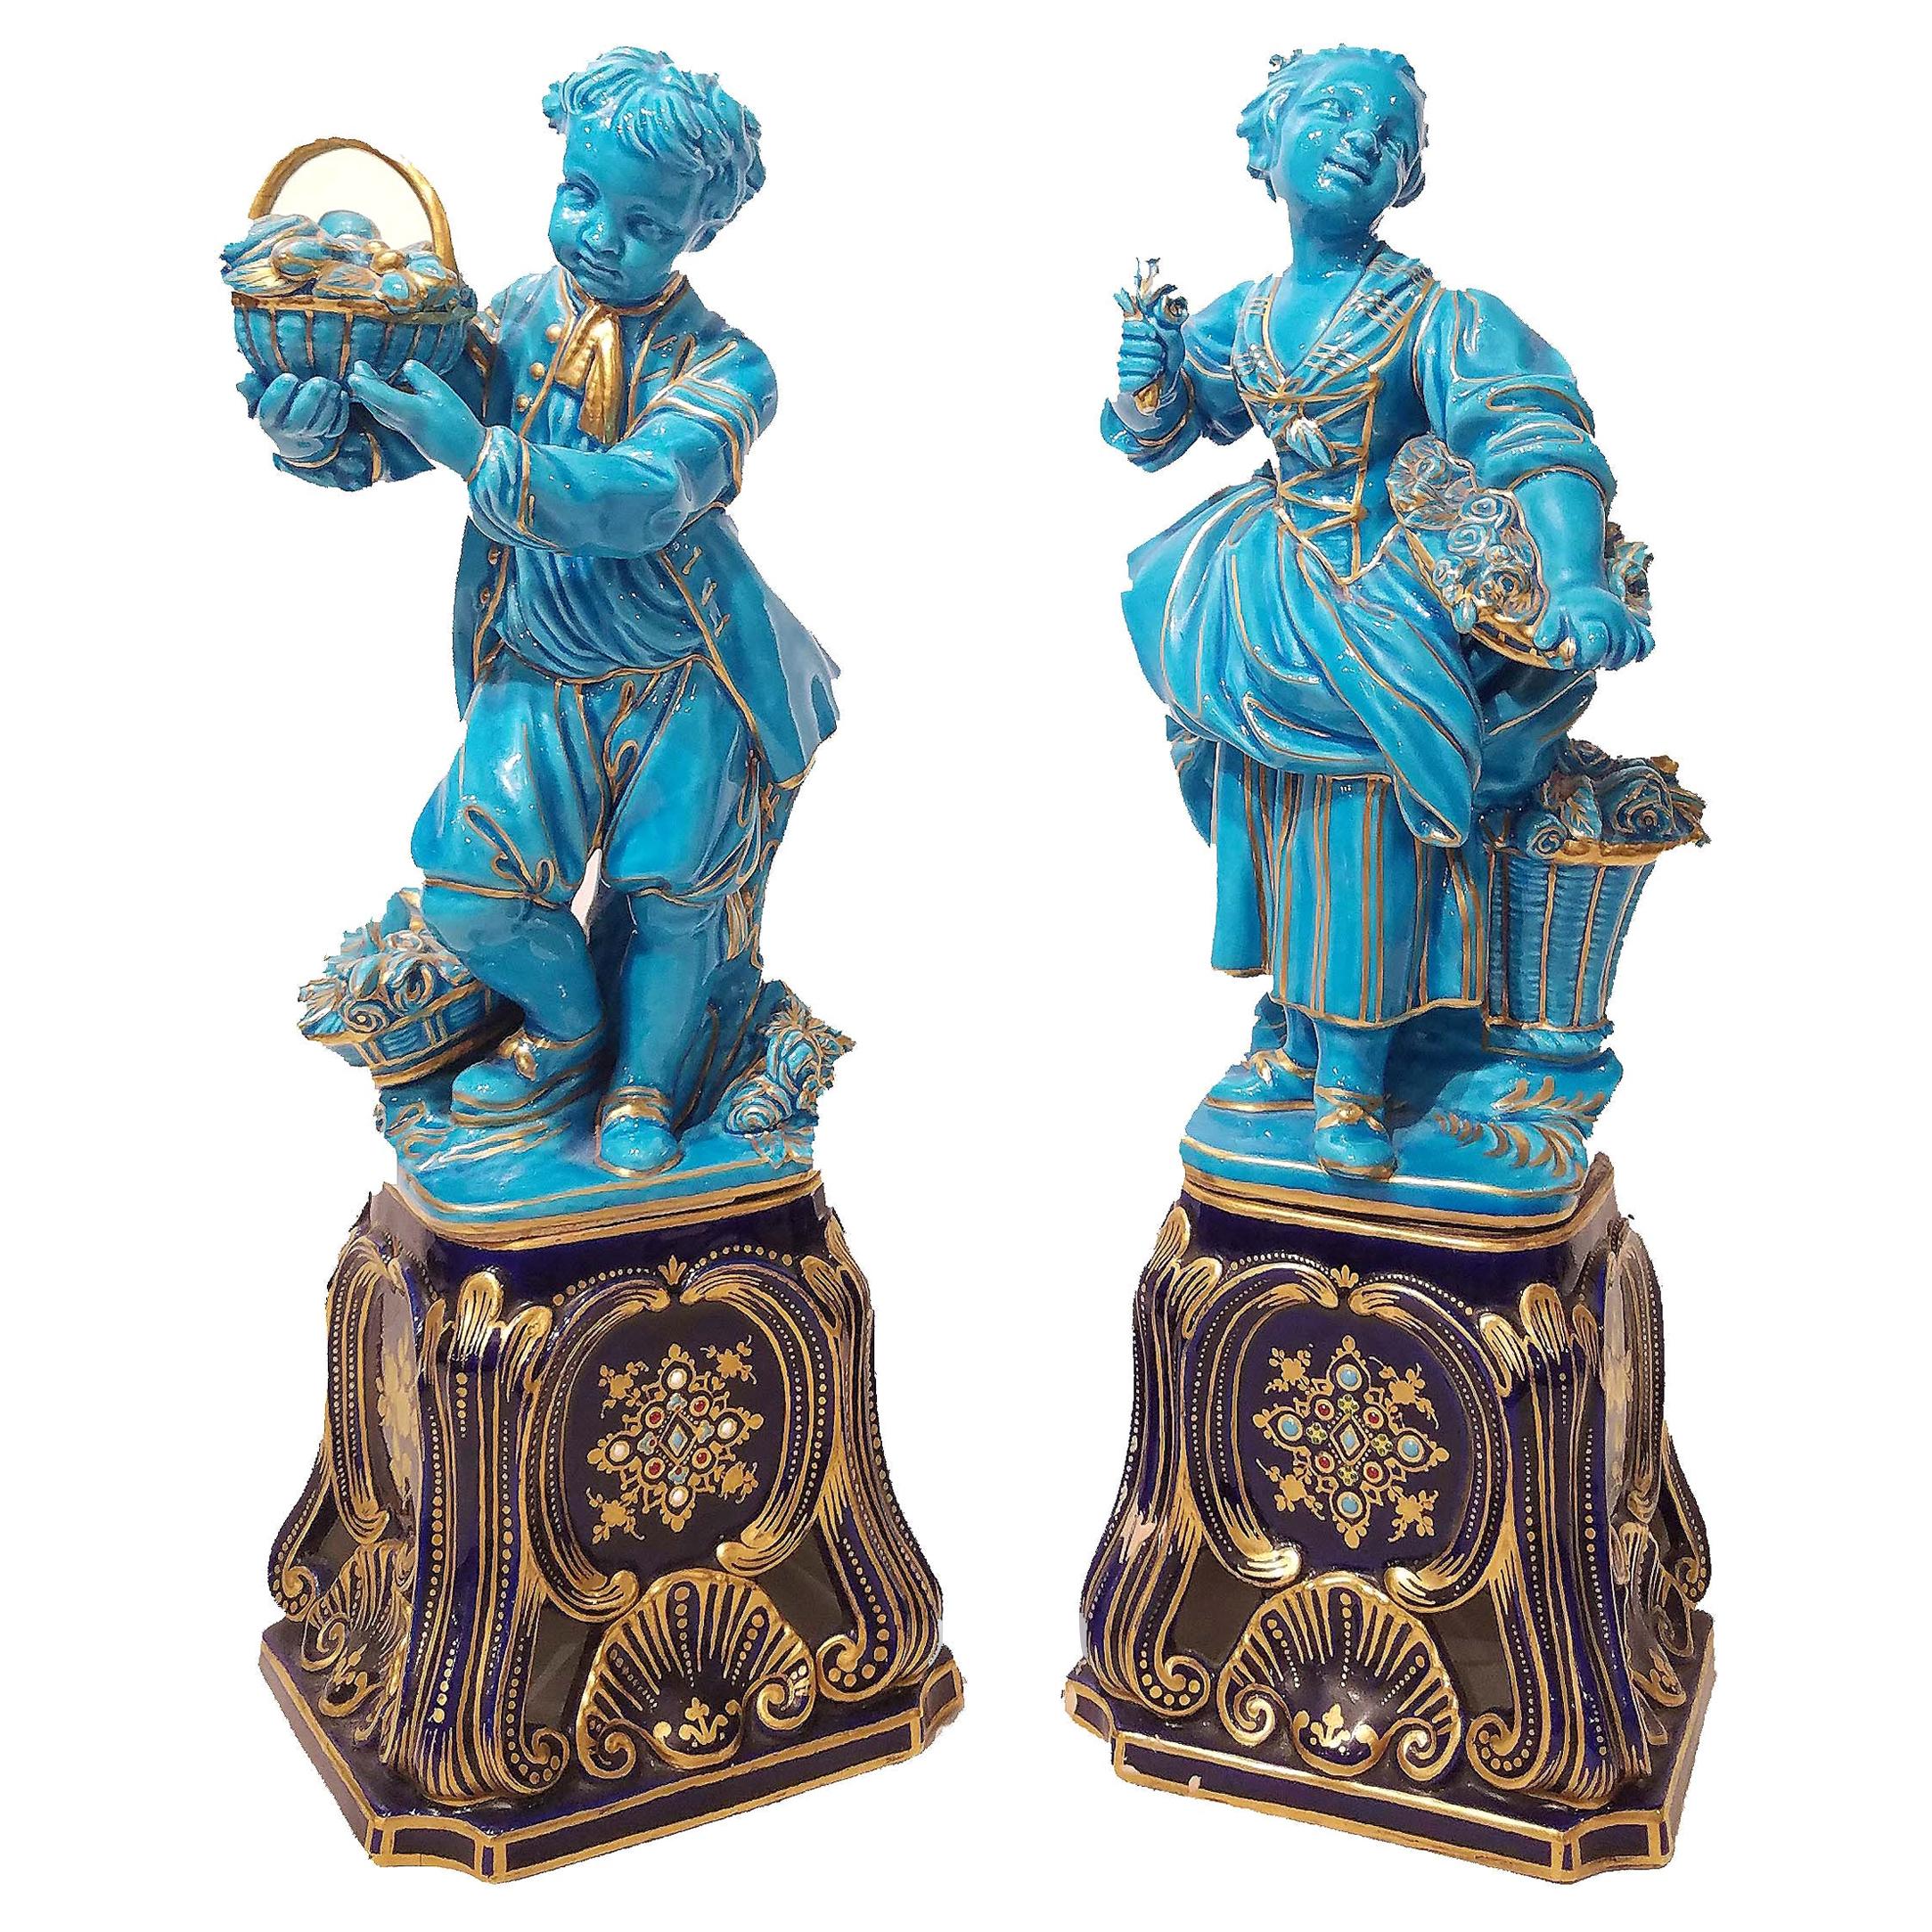 Pair of Sevres Style Porcelain Turquoise-Glazed Figures, 19th Century